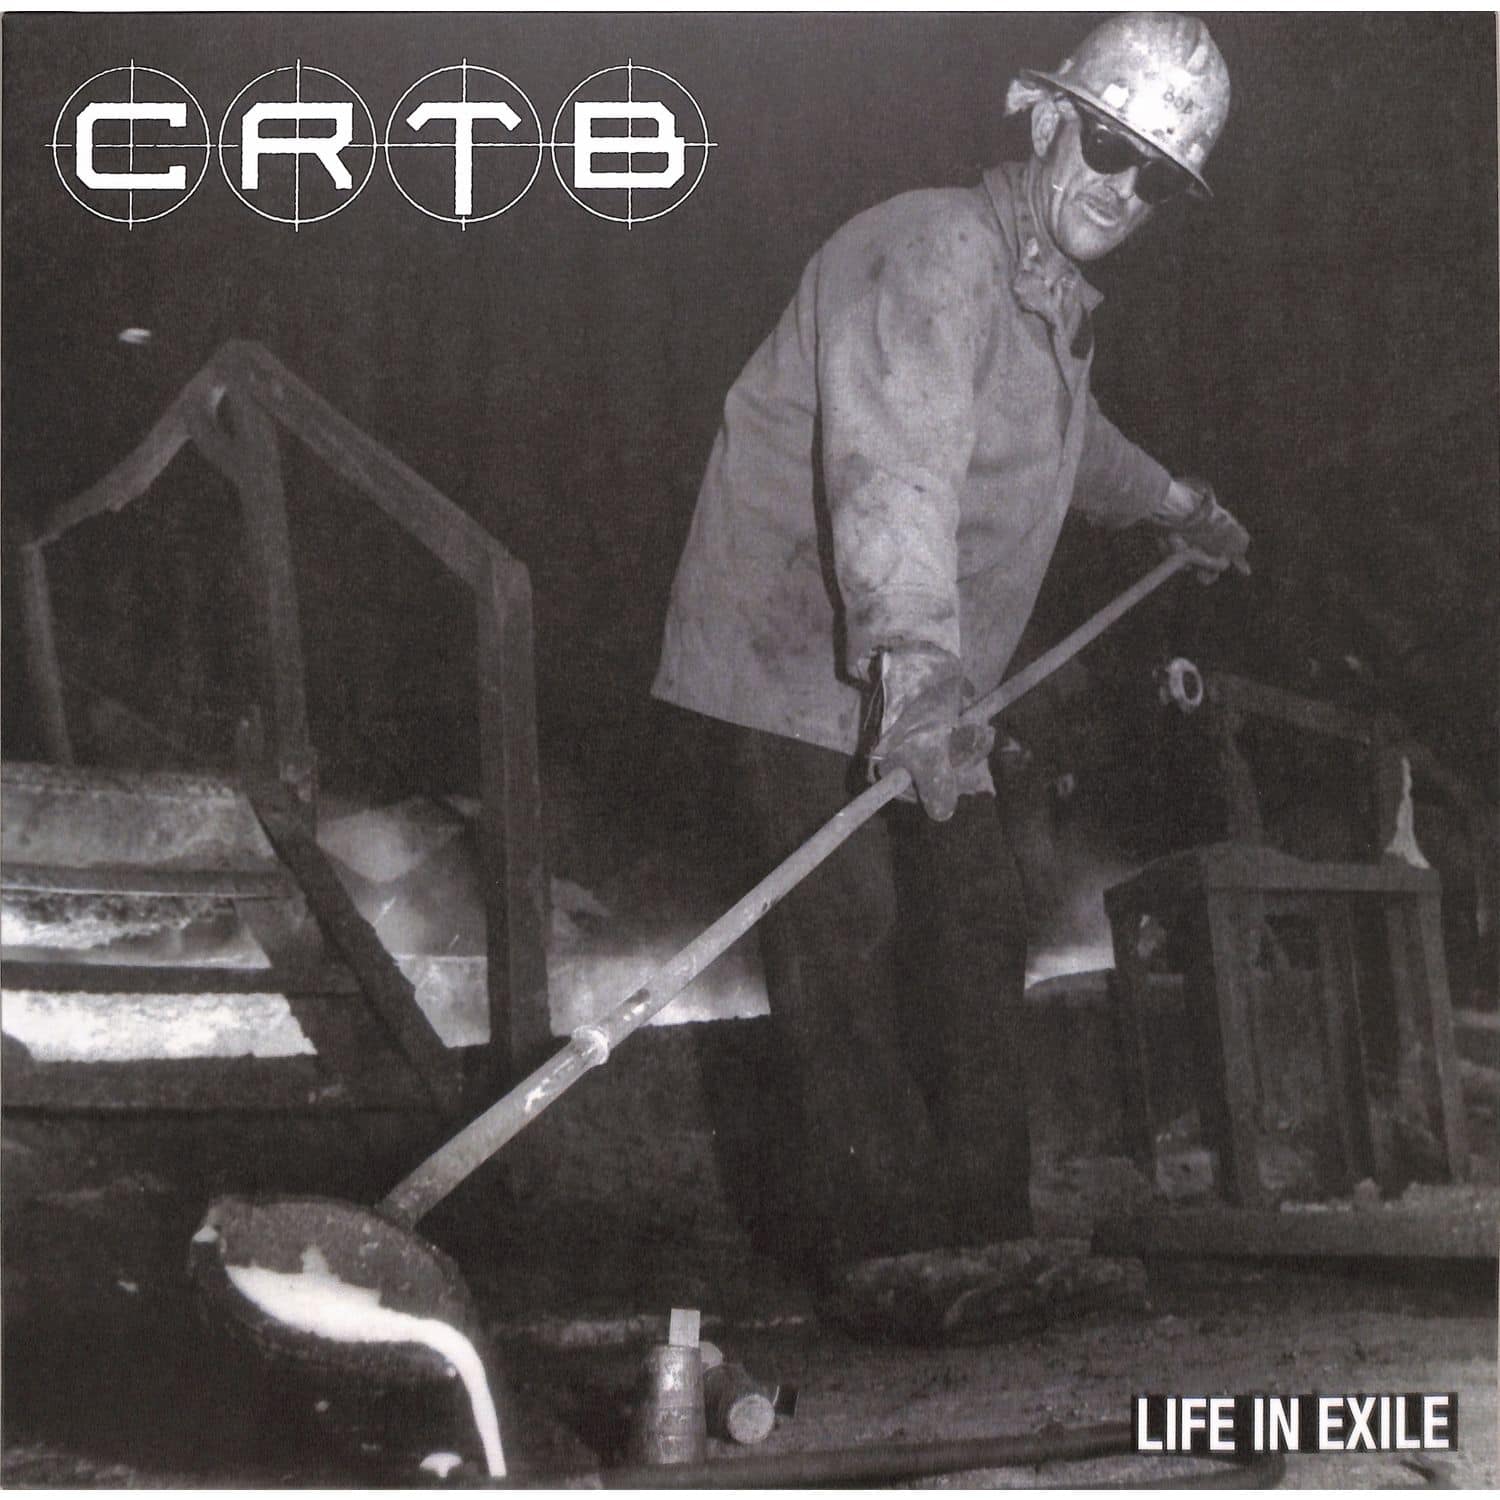 Crtb - LIFE IN EXILE